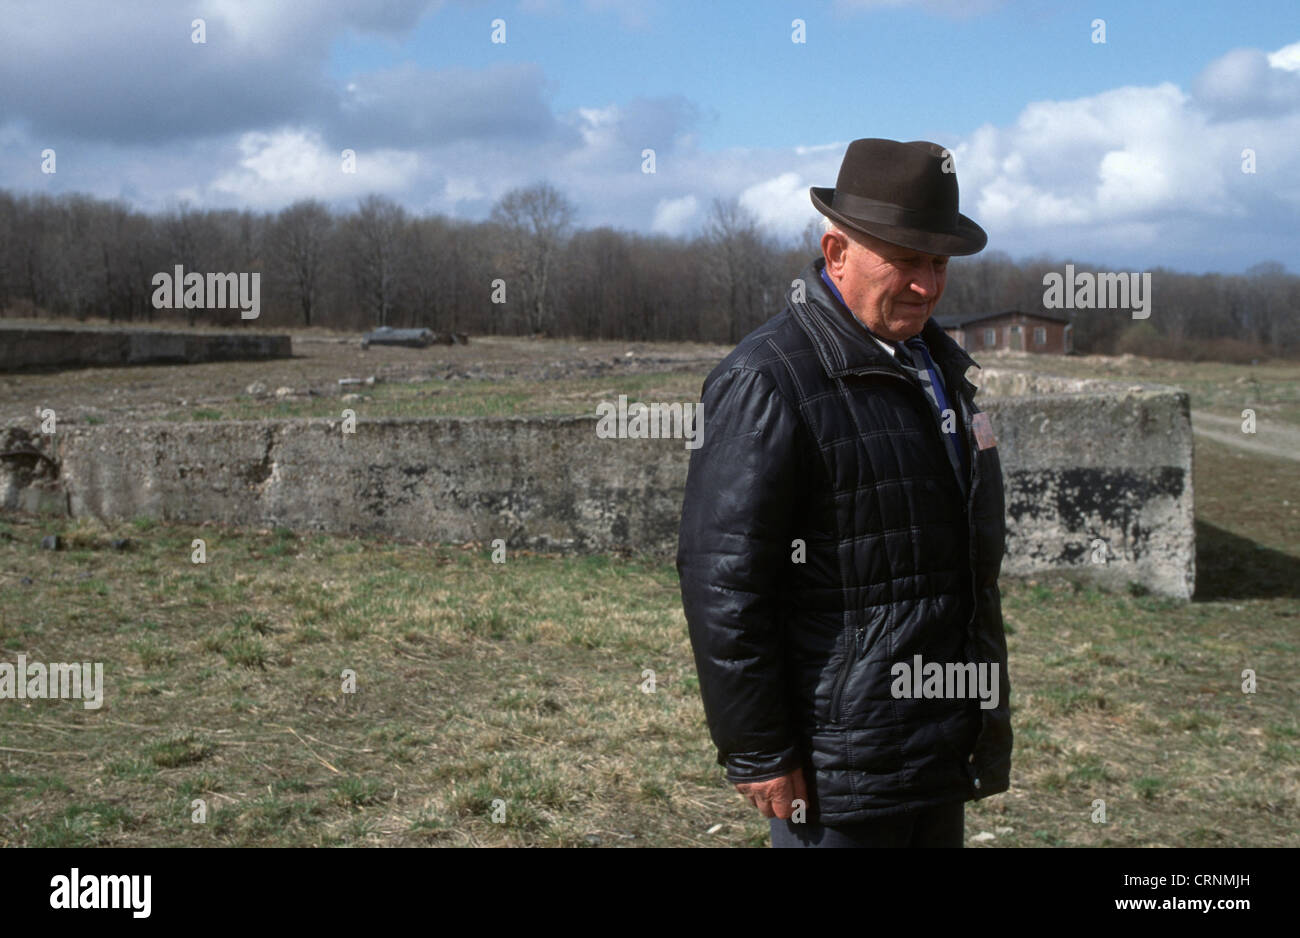 Buchenwald concentration camp Stock Photo